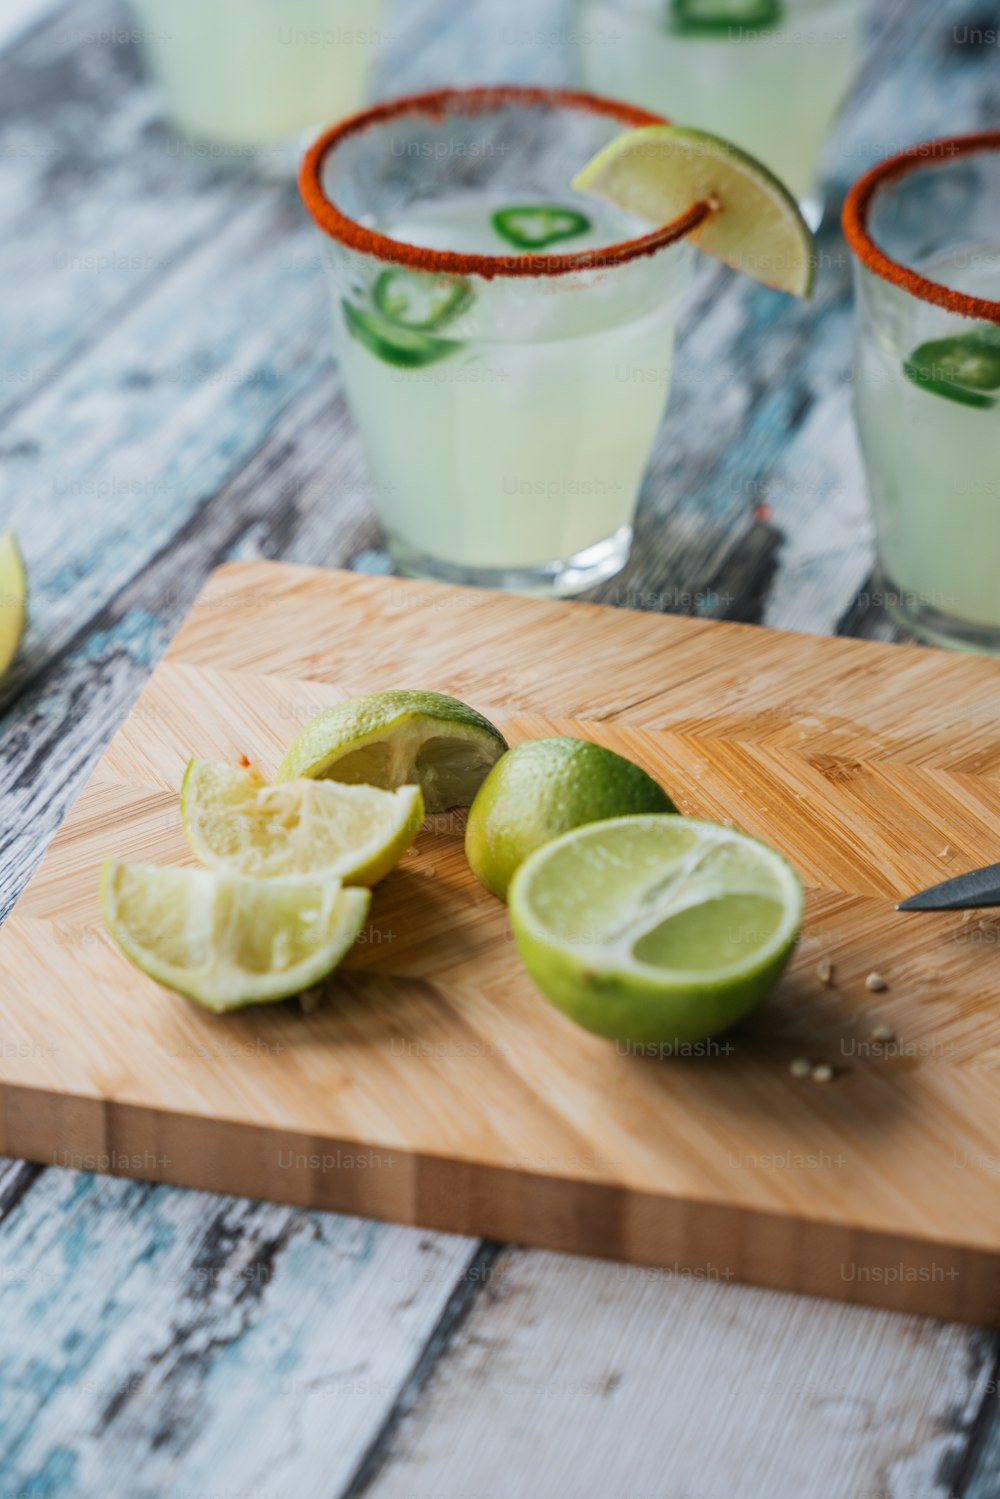 a cutting board with limes and limeade on it